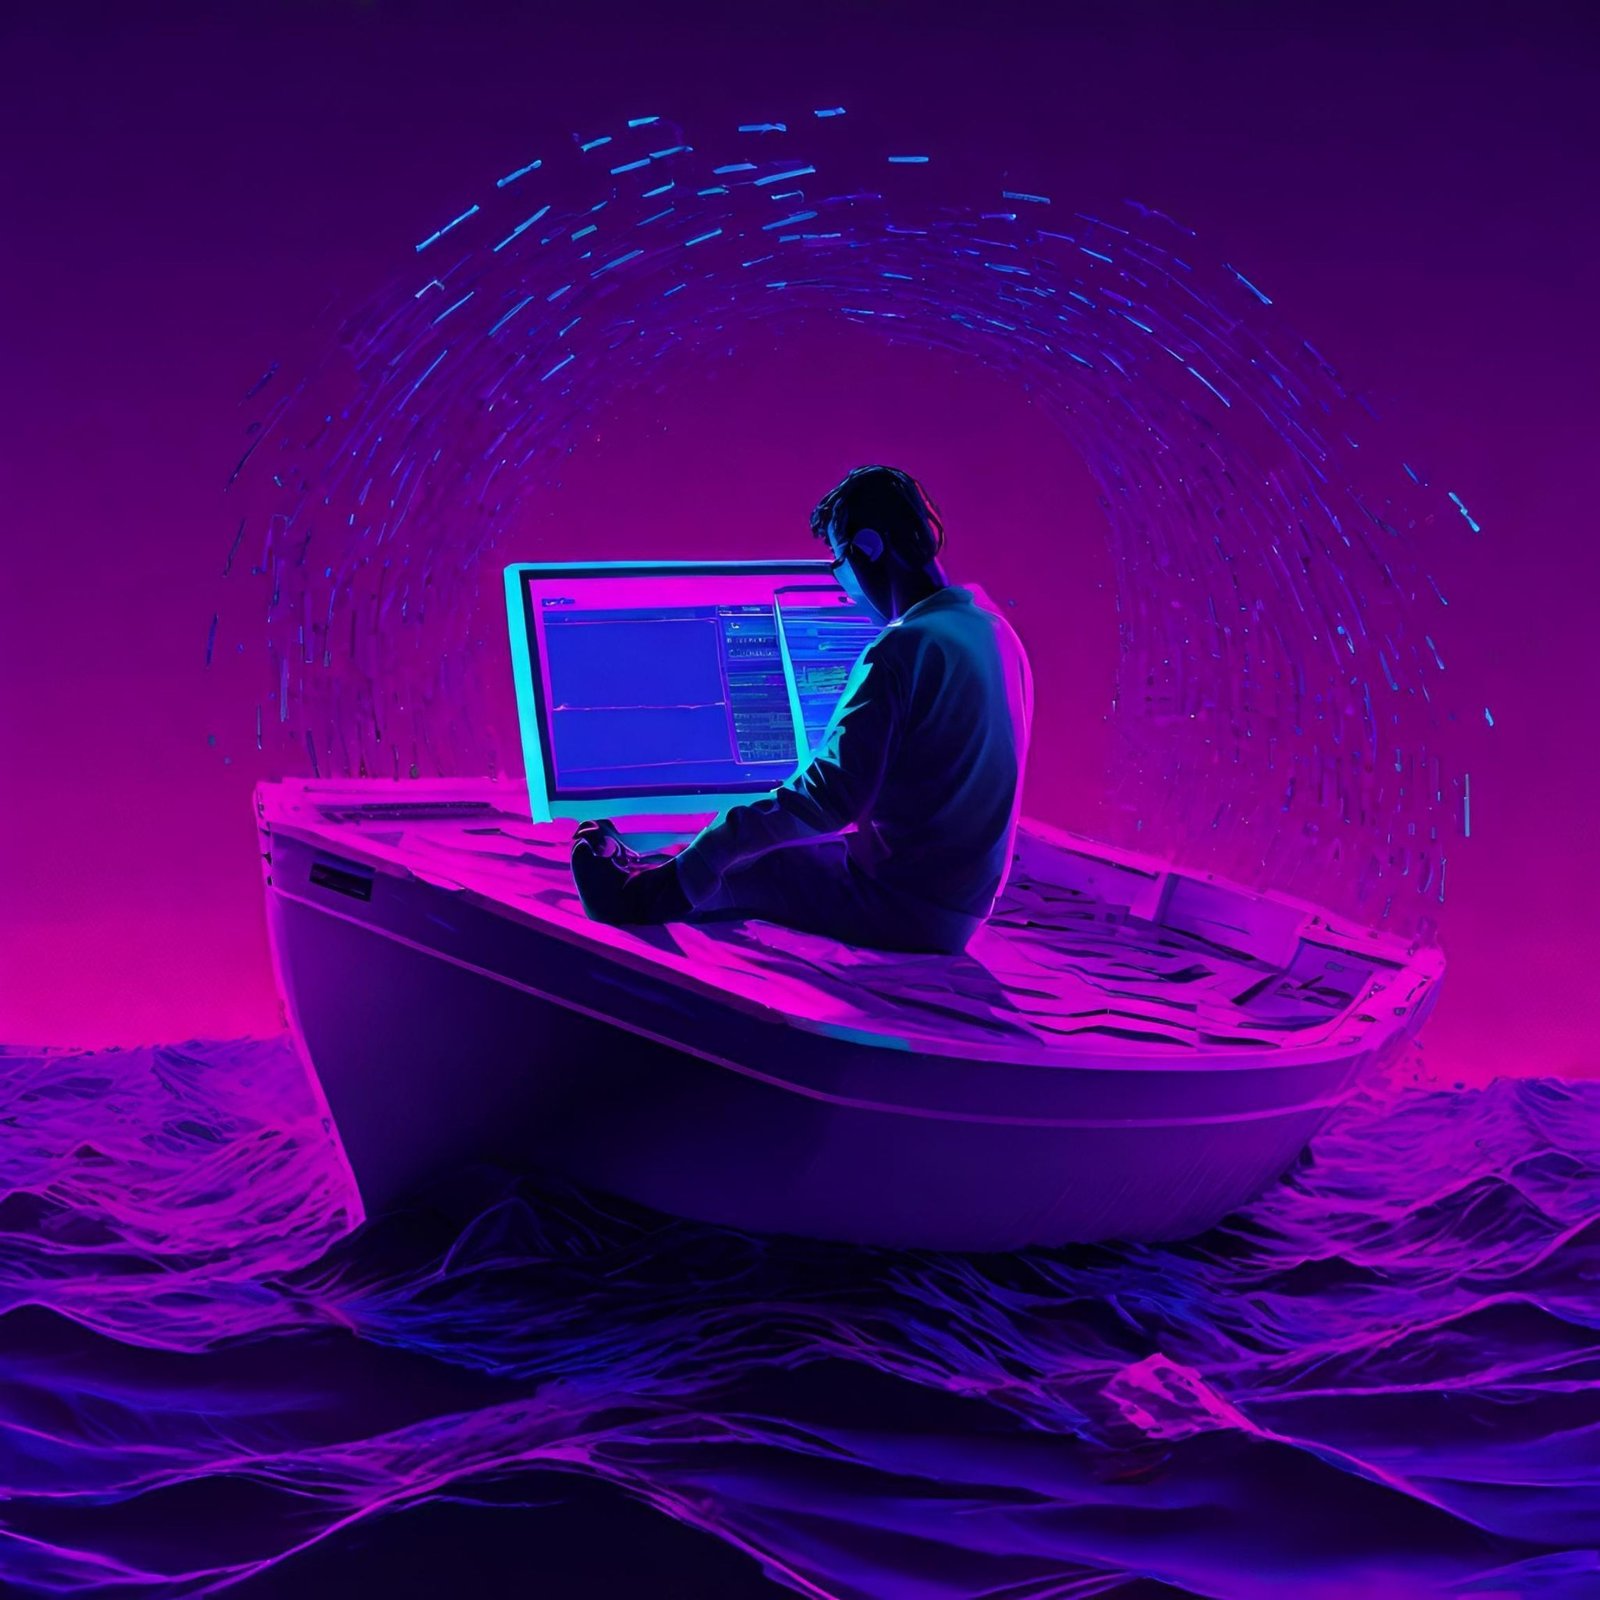 A programmer on a sinking boat surrounded by data illustrates the concept of 'Deleting Rows in DataTables' in this image.